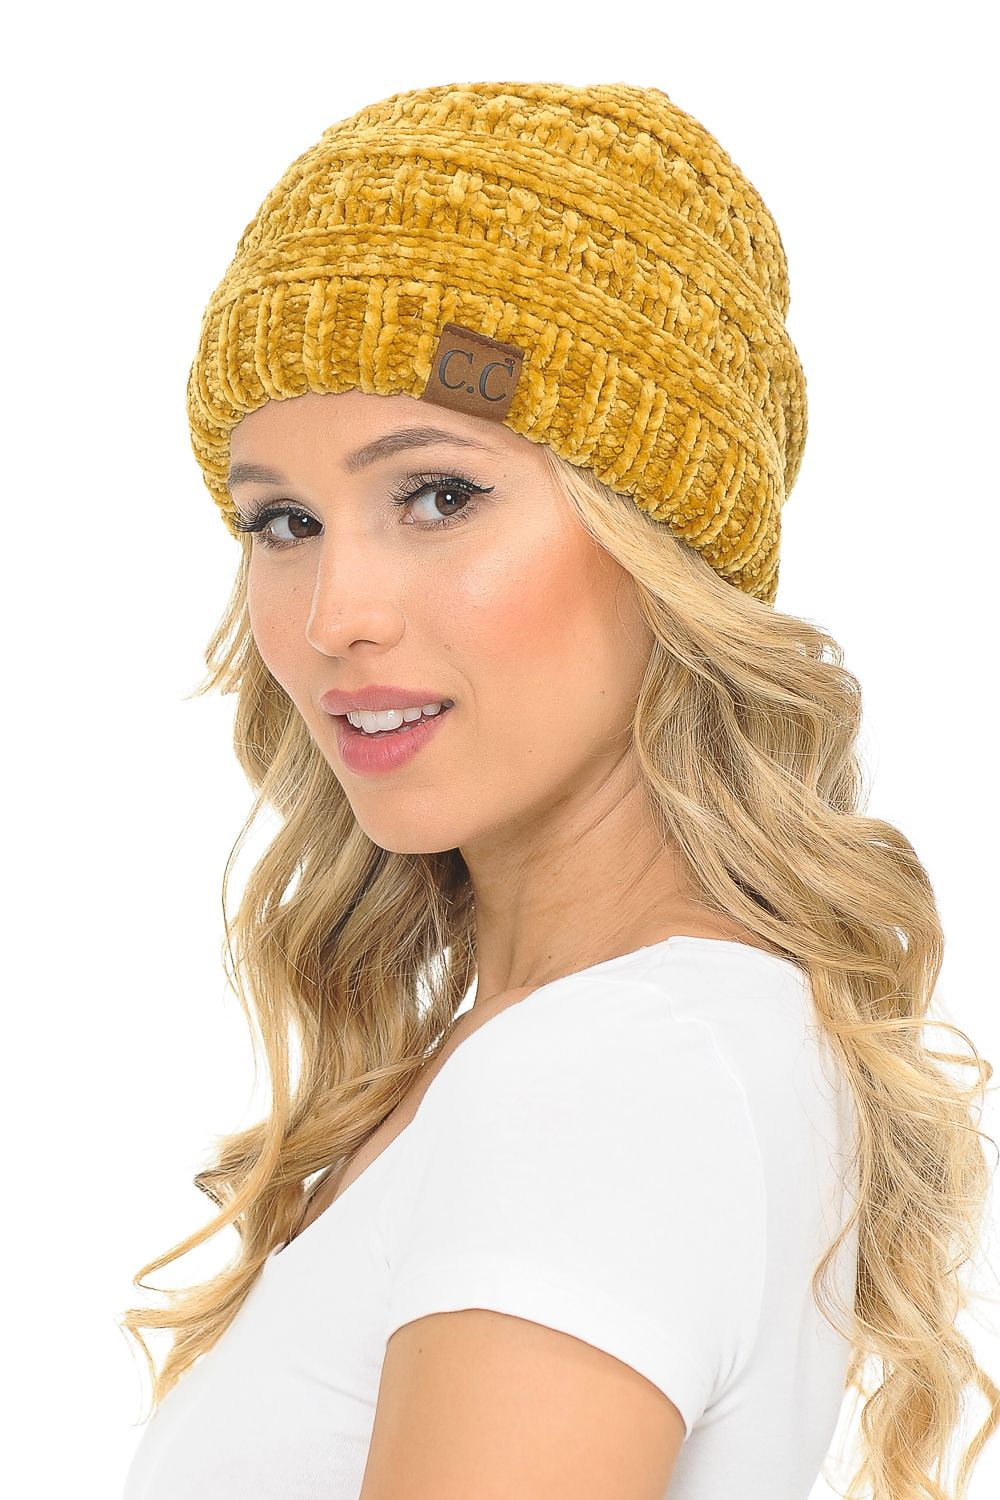 COZY CLASSIC HAT Knit winter hat Mustard knit hat wool knitted hat knit beanie chunky knit slouch beanie Classic slouchy knit hat